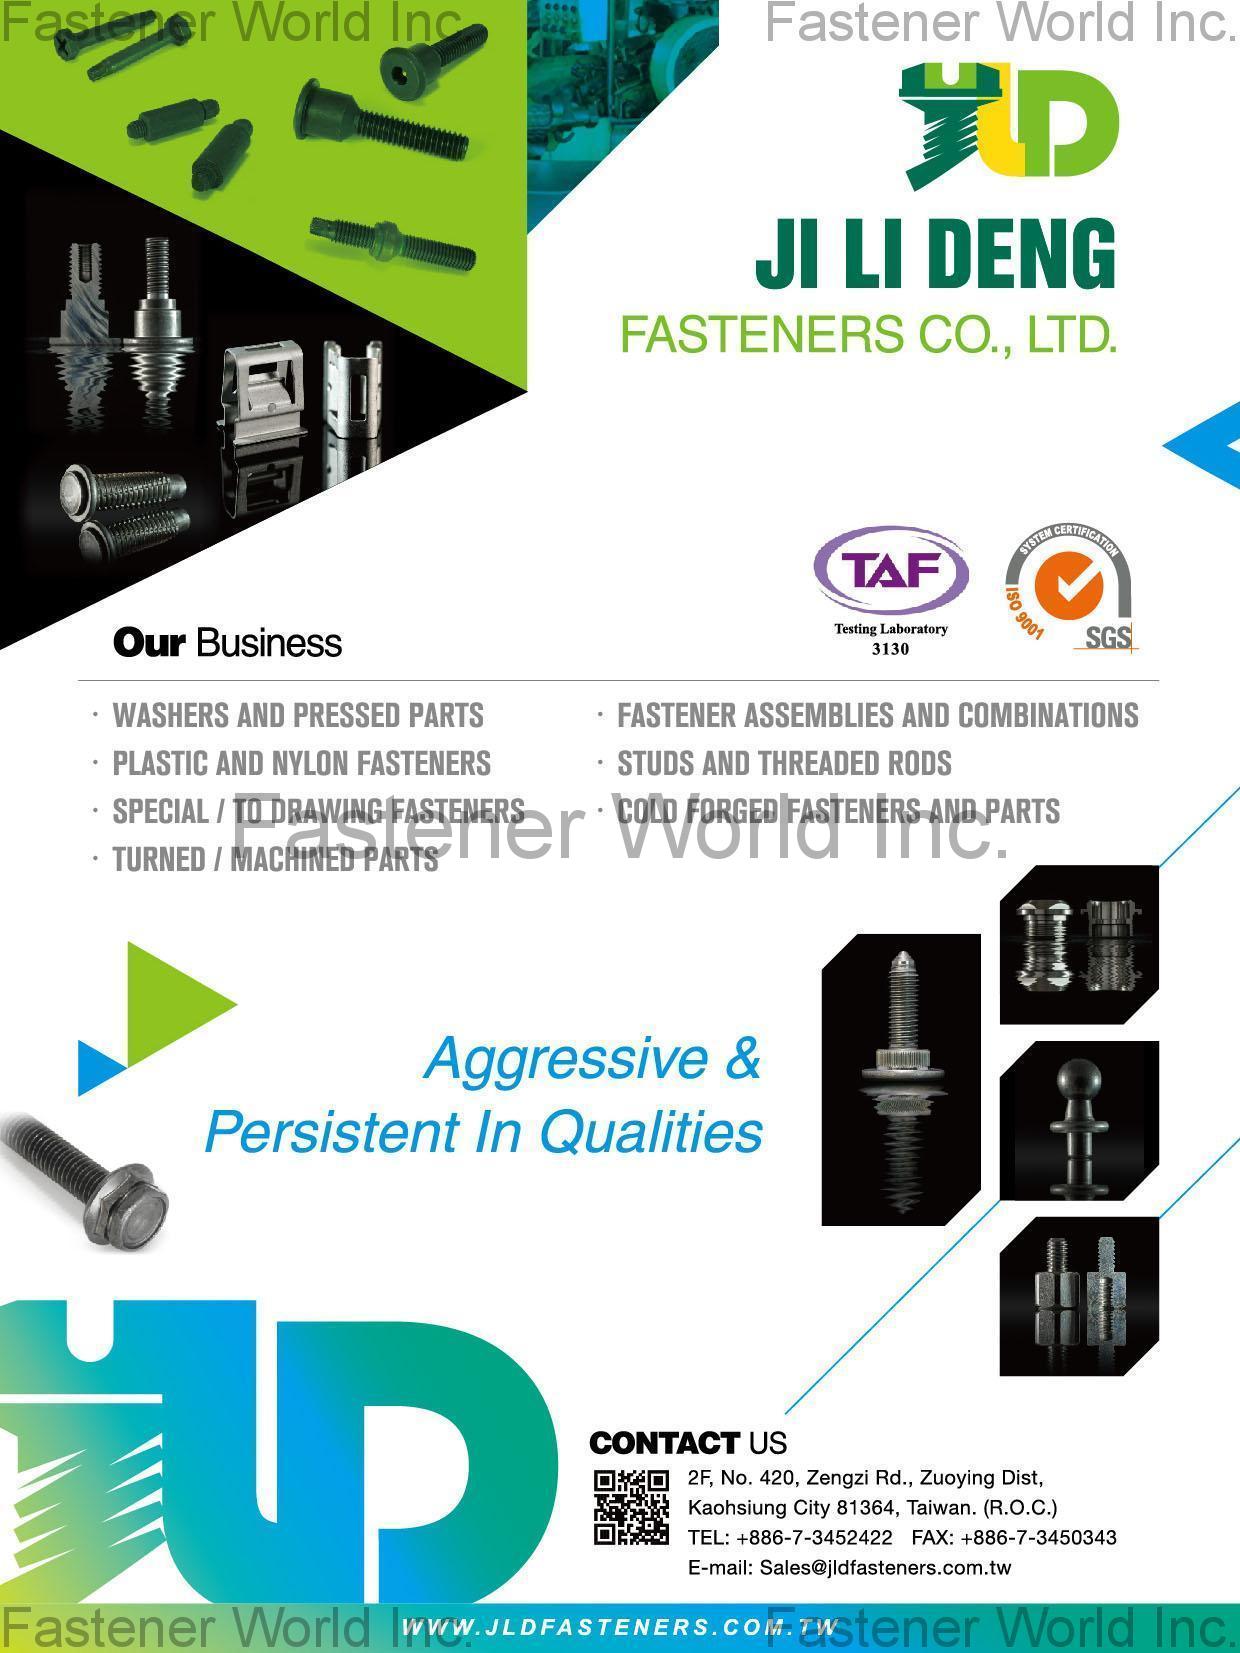 JI LI DENG FASTENERS CO., LTD. , WASHERS AND PRESSED PARTS, PLASTIC AND NYLON FASTENERS, SPECIAL / TO DRAWING FASTENERS, TURNED / MACHINED PARTS, FASTENER ASSEMBLIES AND COMBINATIONS, STUDS AND THREADED RODS, COLD FORGED FASTENERS AND PARTS , Machine Parts